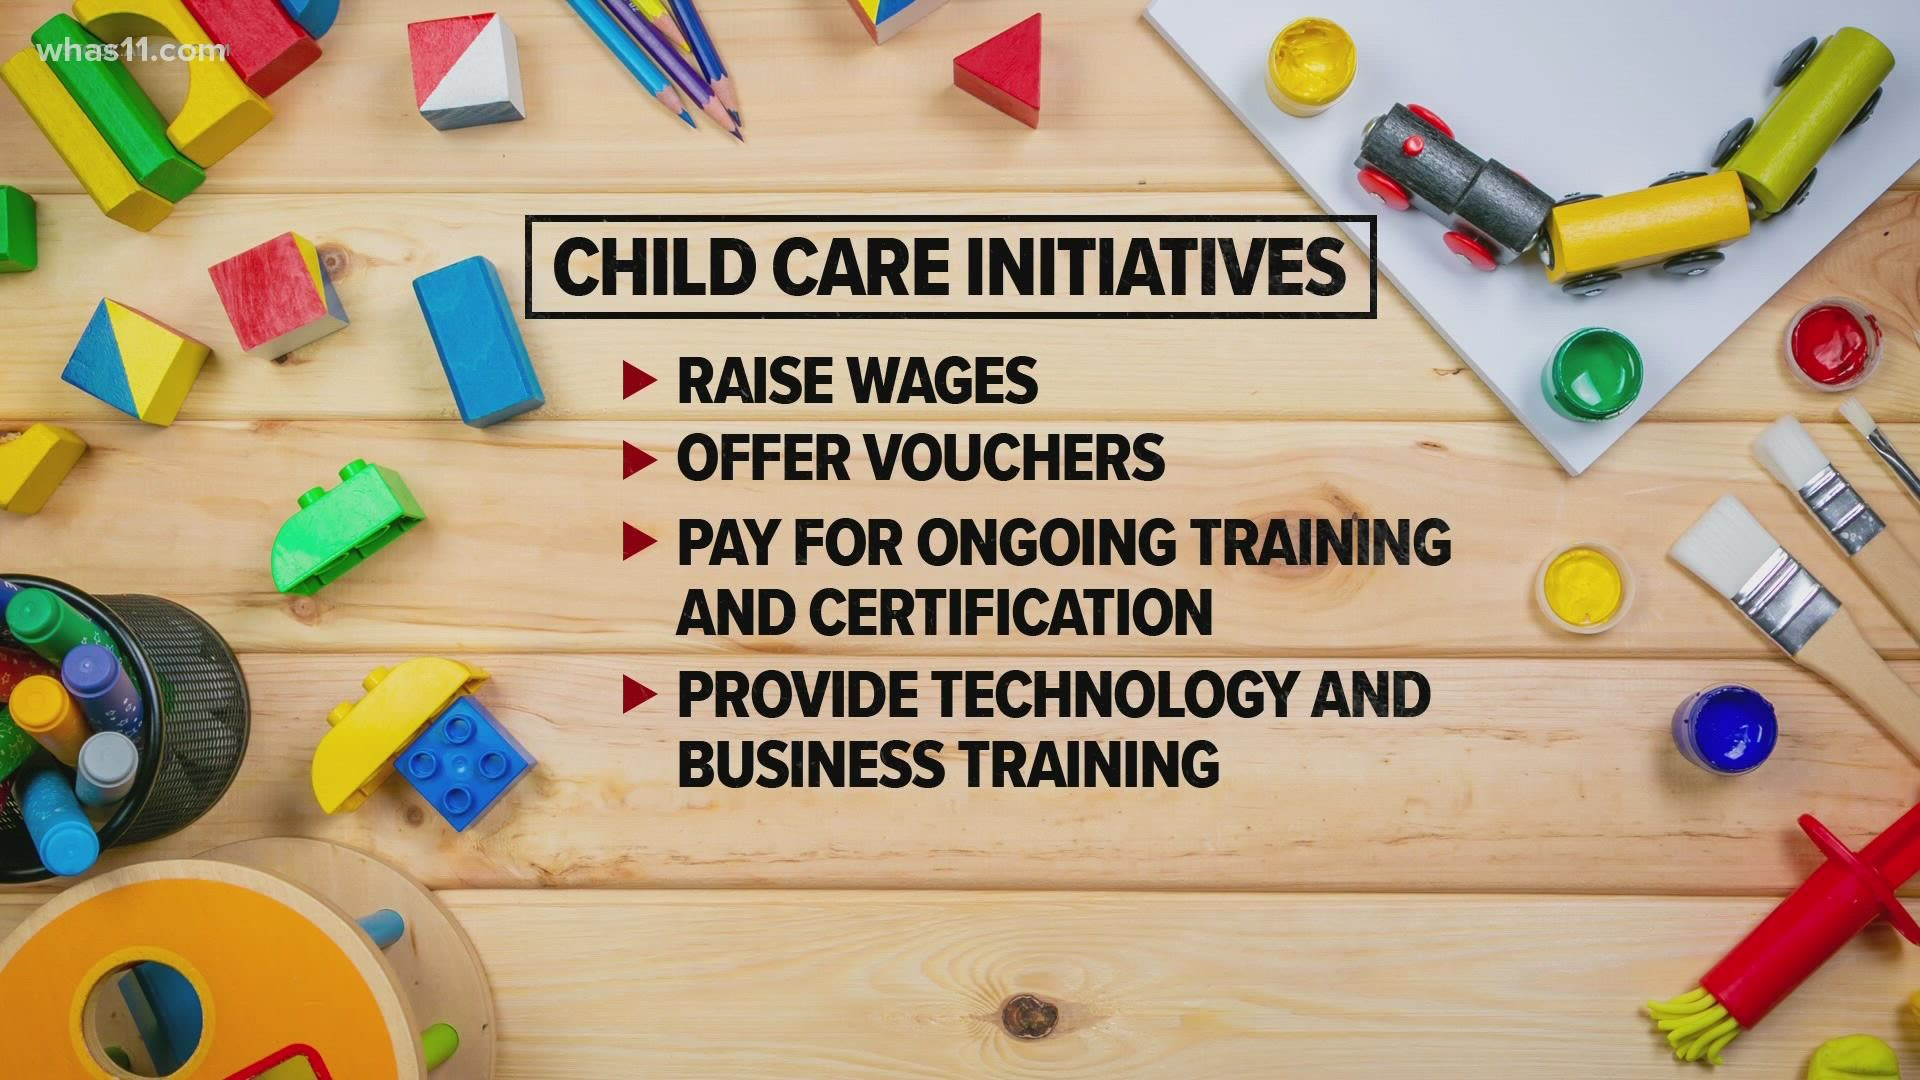 A WHAS11 FOCUS investigation found some areas of our city have as few as 15 child care spots per 100 children, according to the Greater Louisville Project.